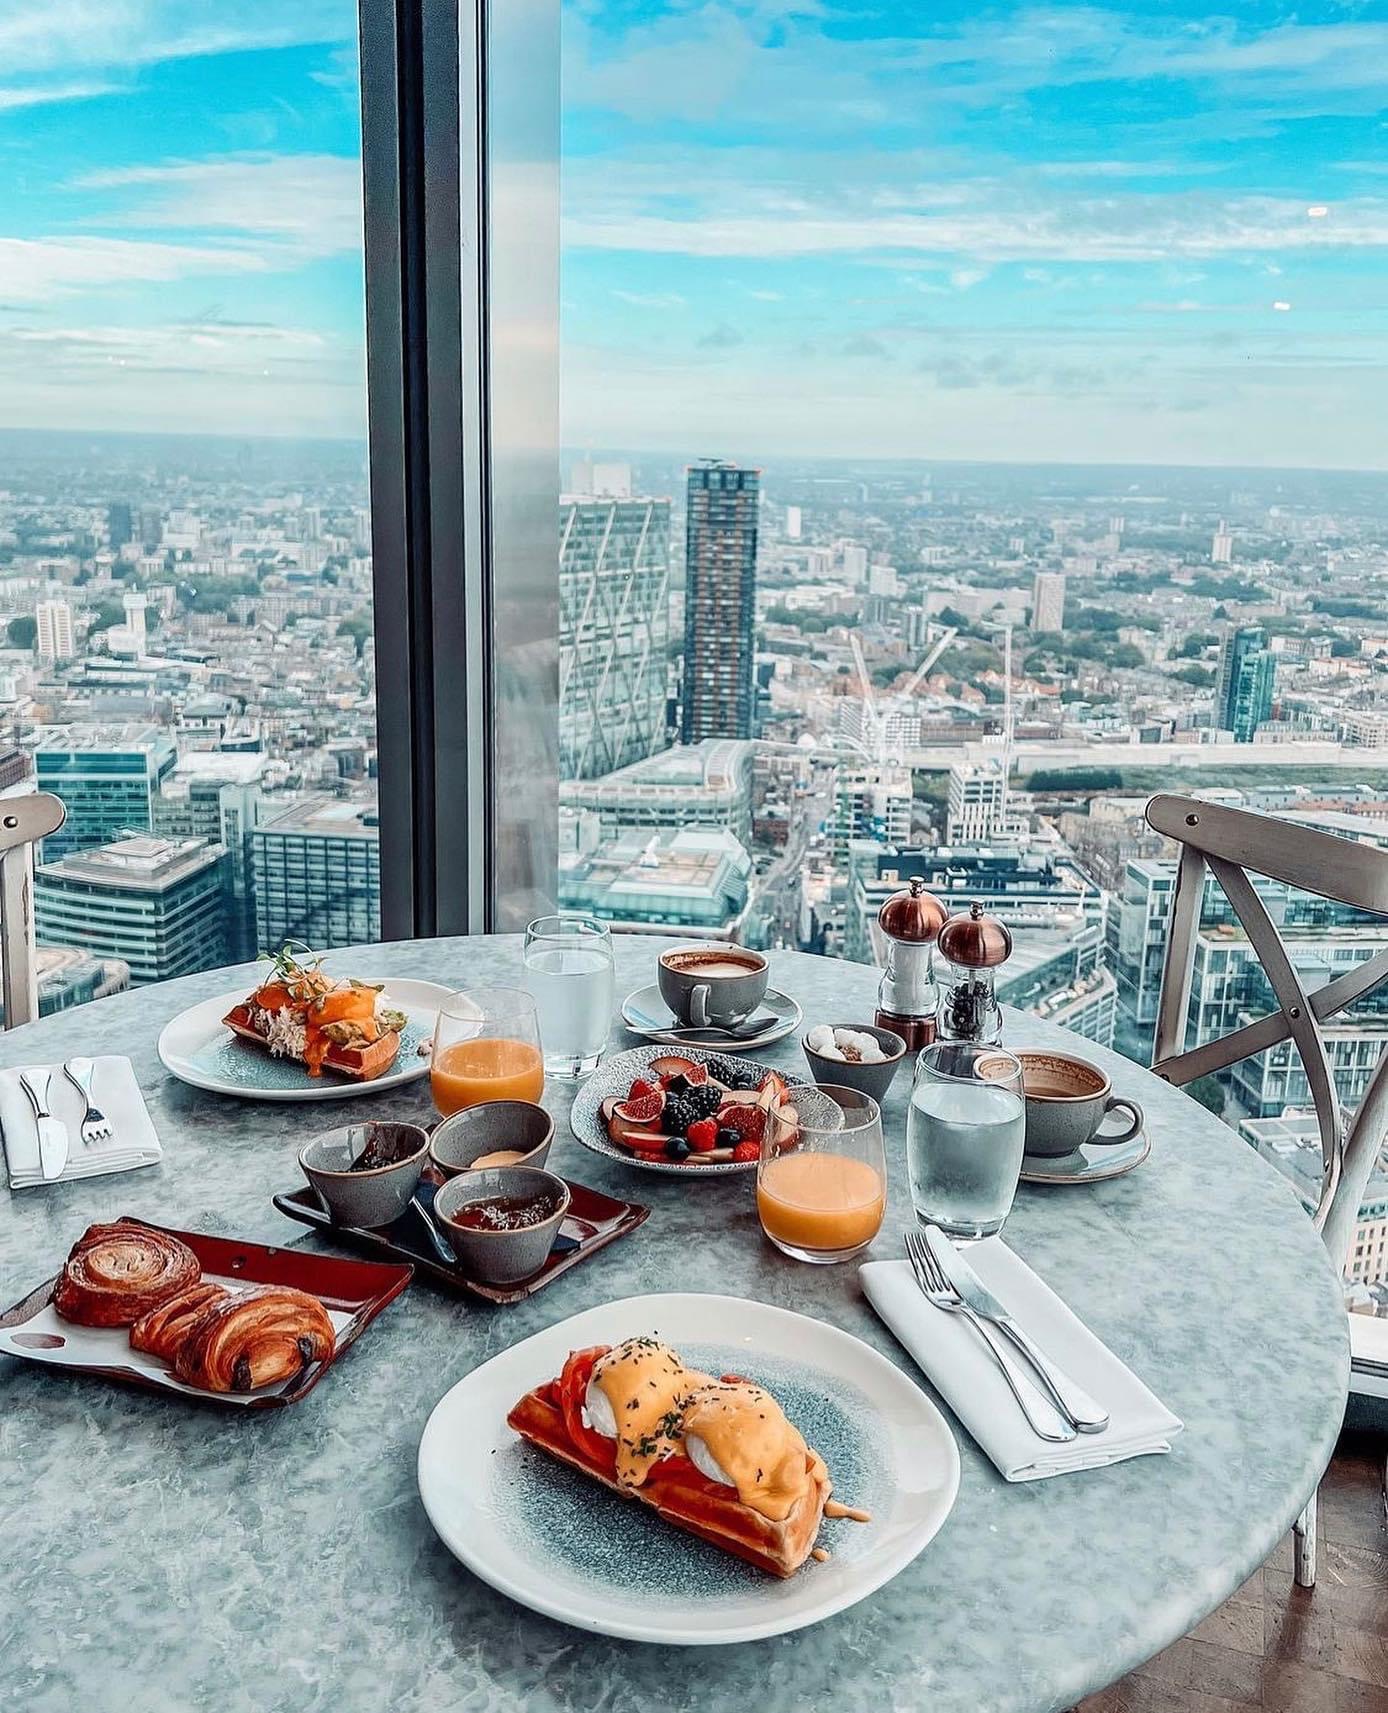 12 Days of Pingmas: Brunch your way into London Header Image